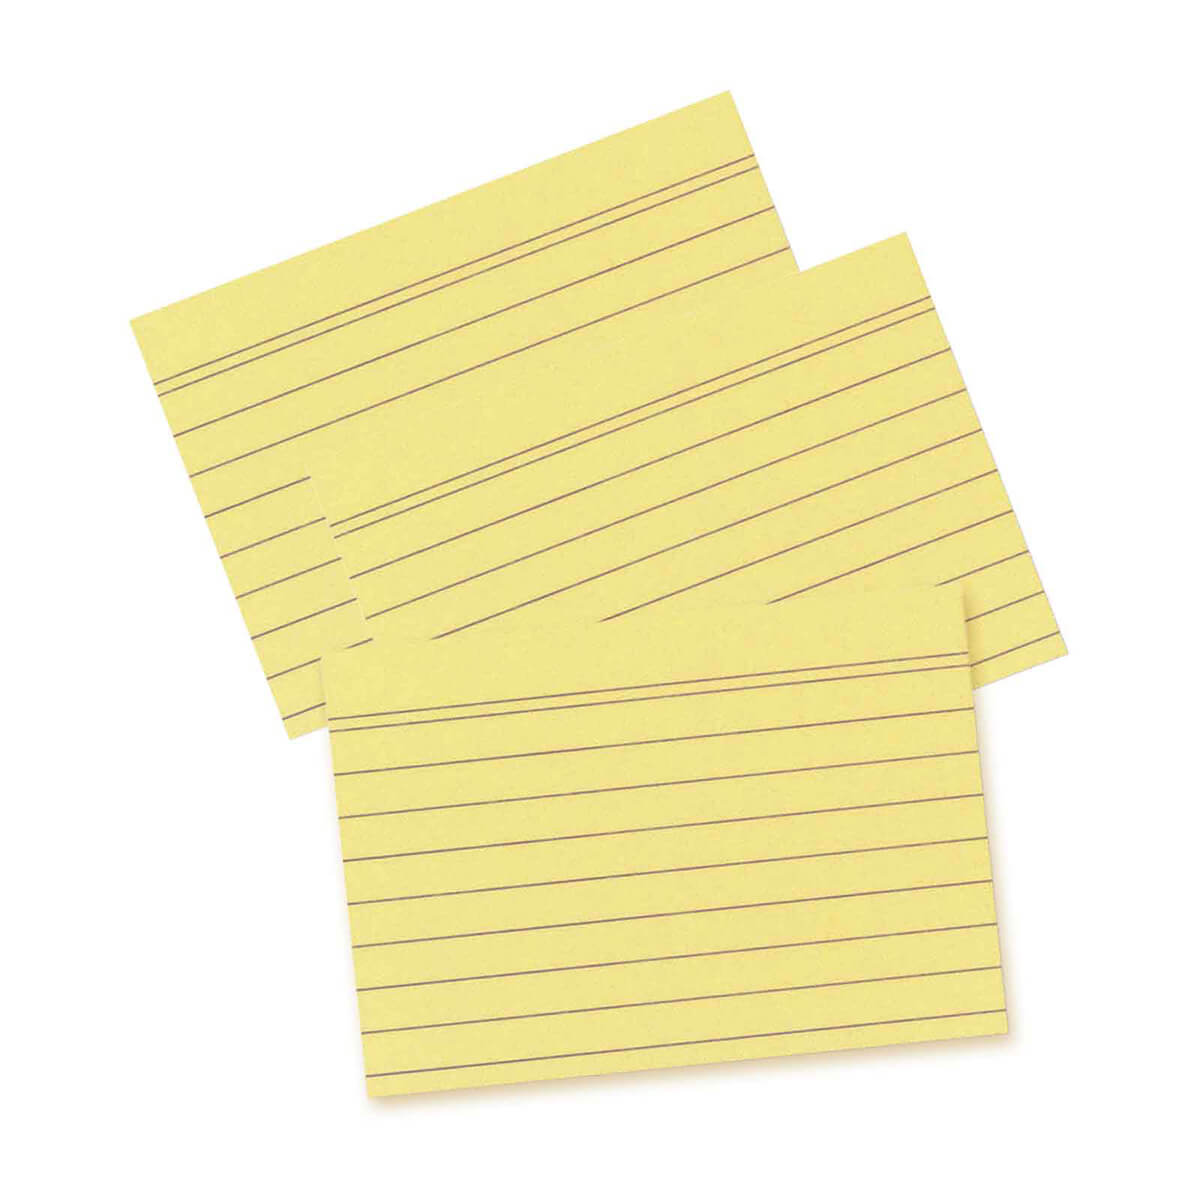 Herlitz Index cards lined 100 pieces shrink wrapped a5 Yellow